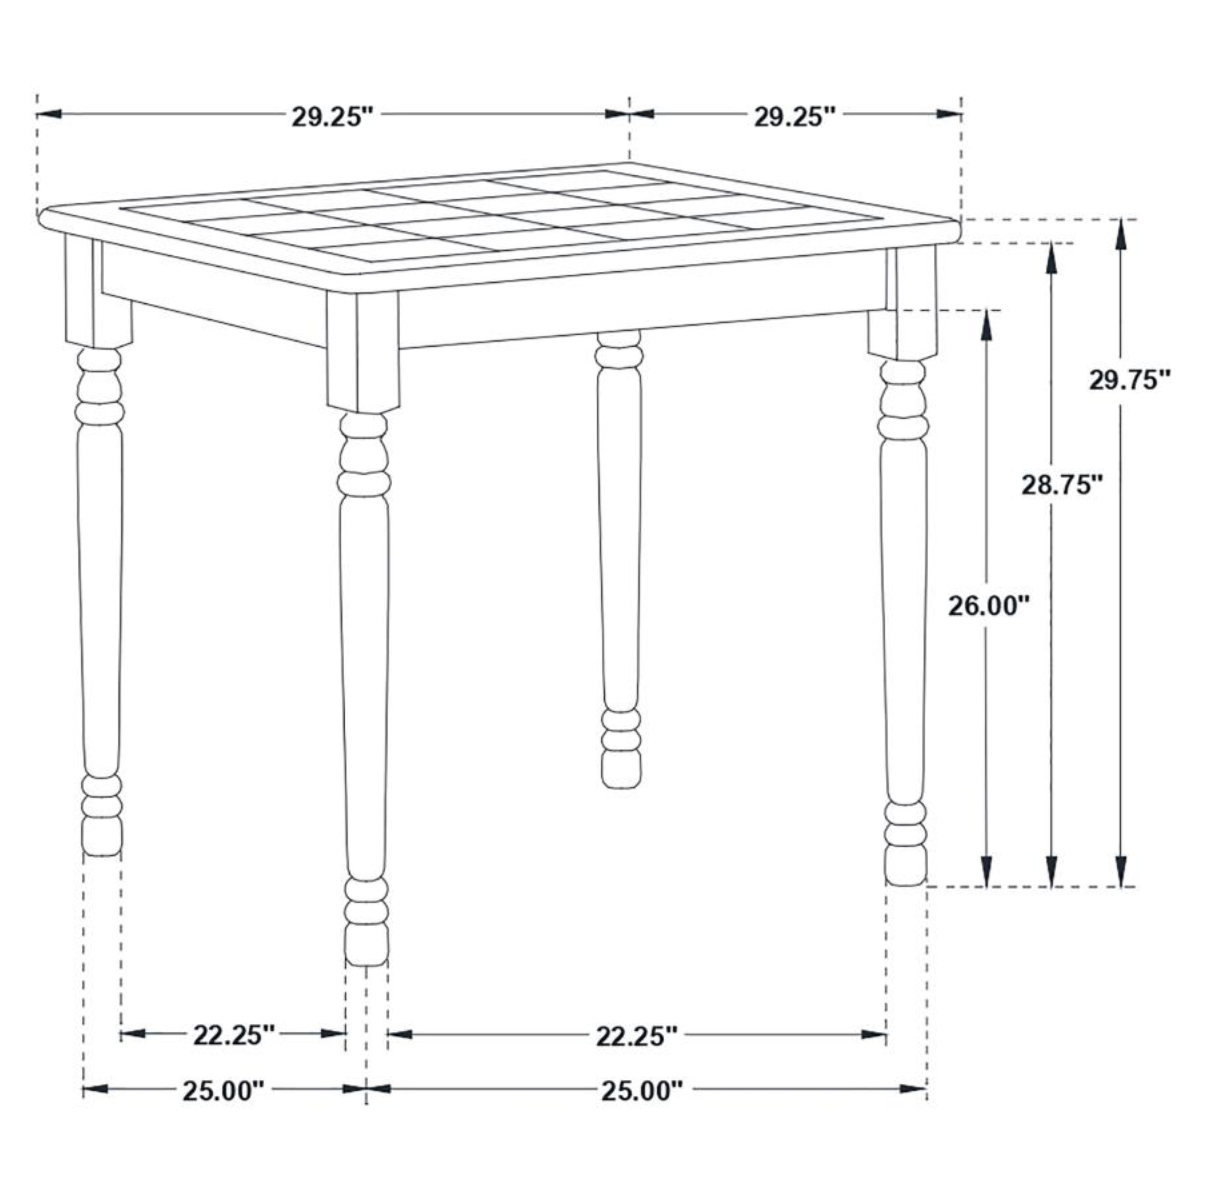 CARLENE 5-piece Square Dining Table